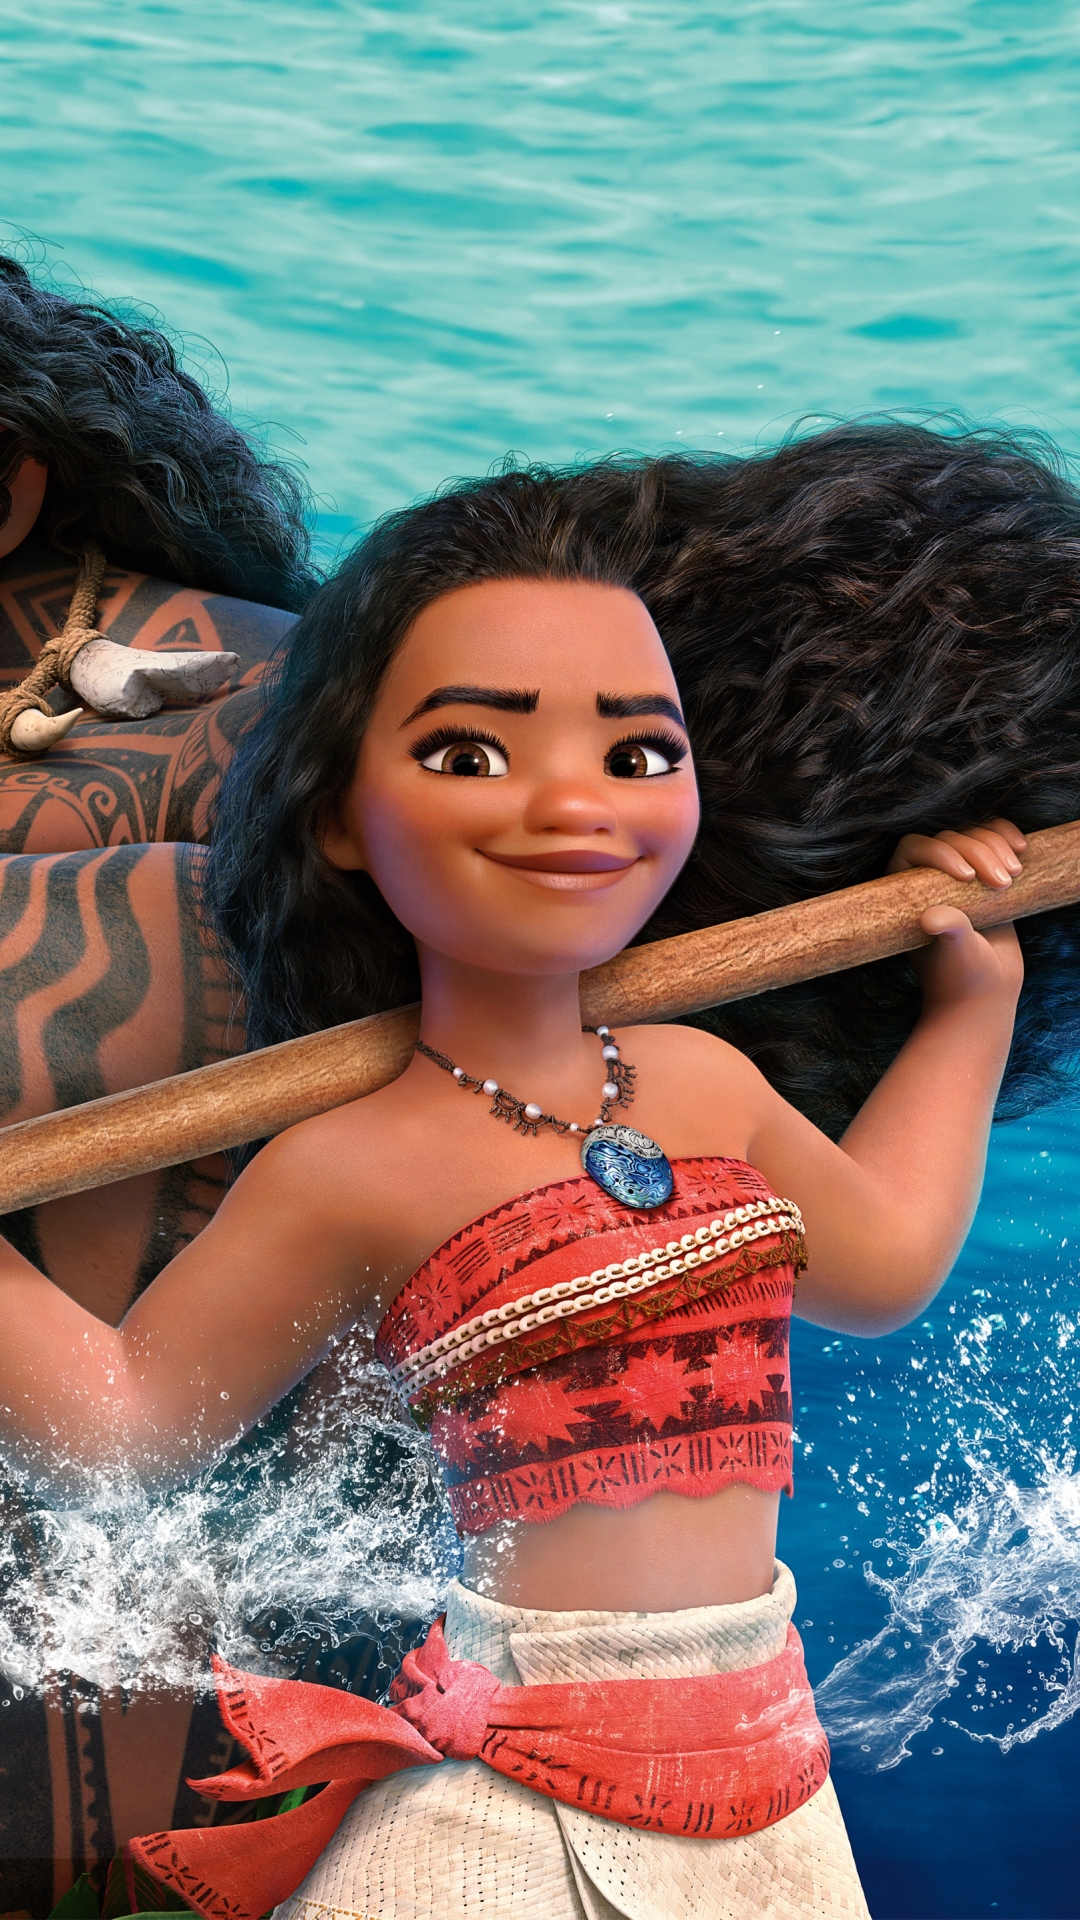 1920x1080 / 1920x1080 moana wallpaper hd - Coolwallpapers.me!